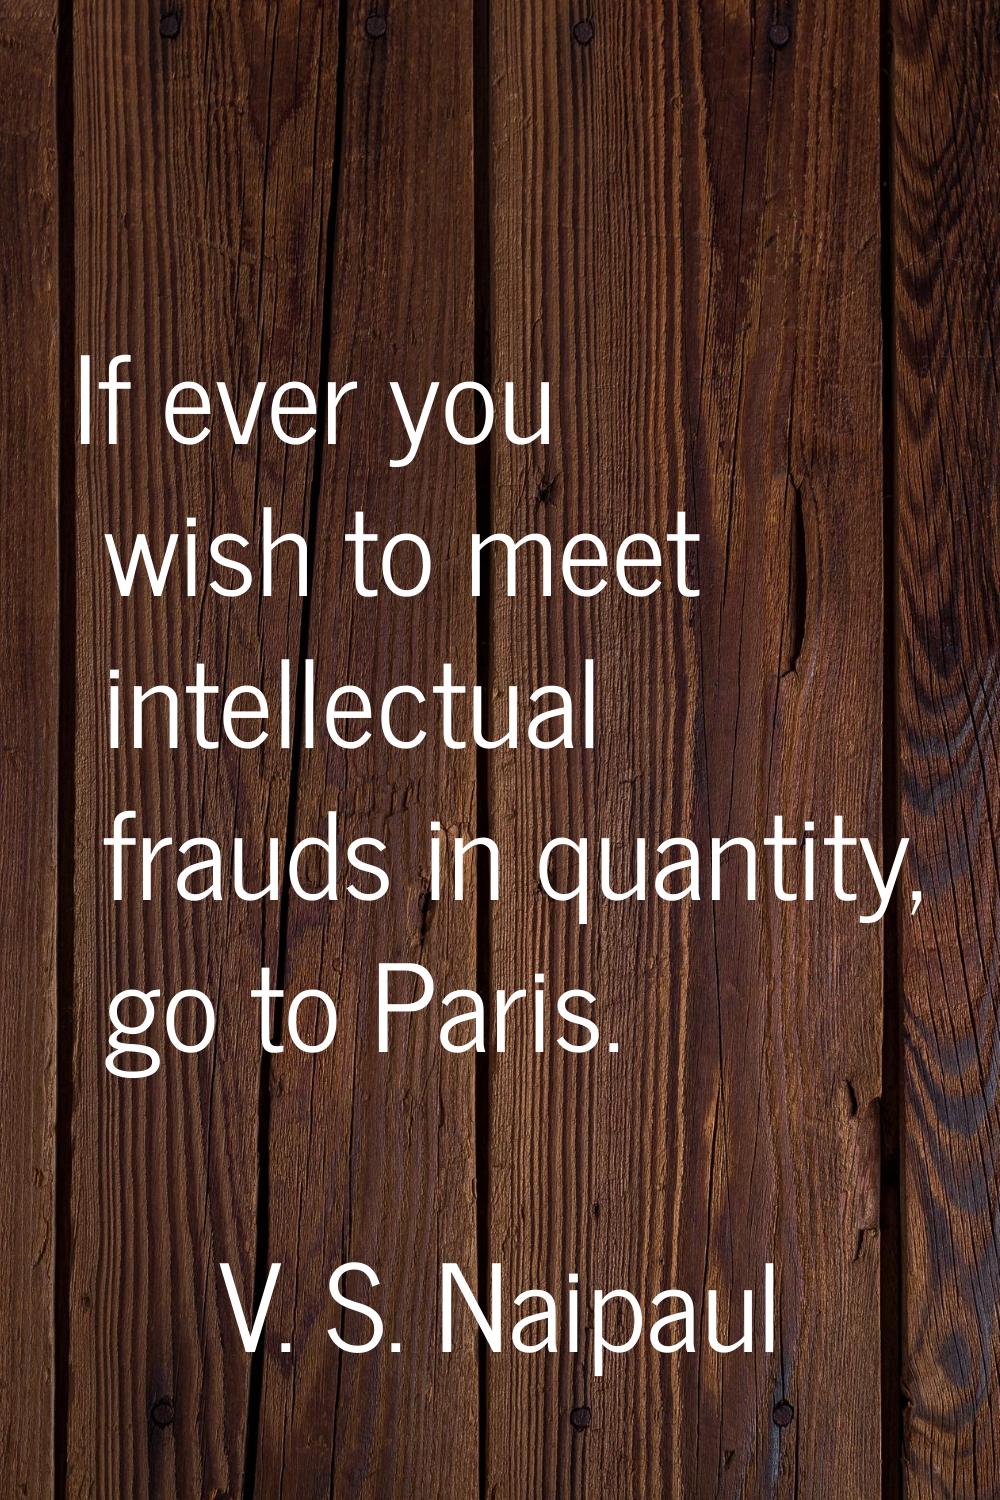 If ever you wish to meet intellectual frauds in quantity, go to Paris.